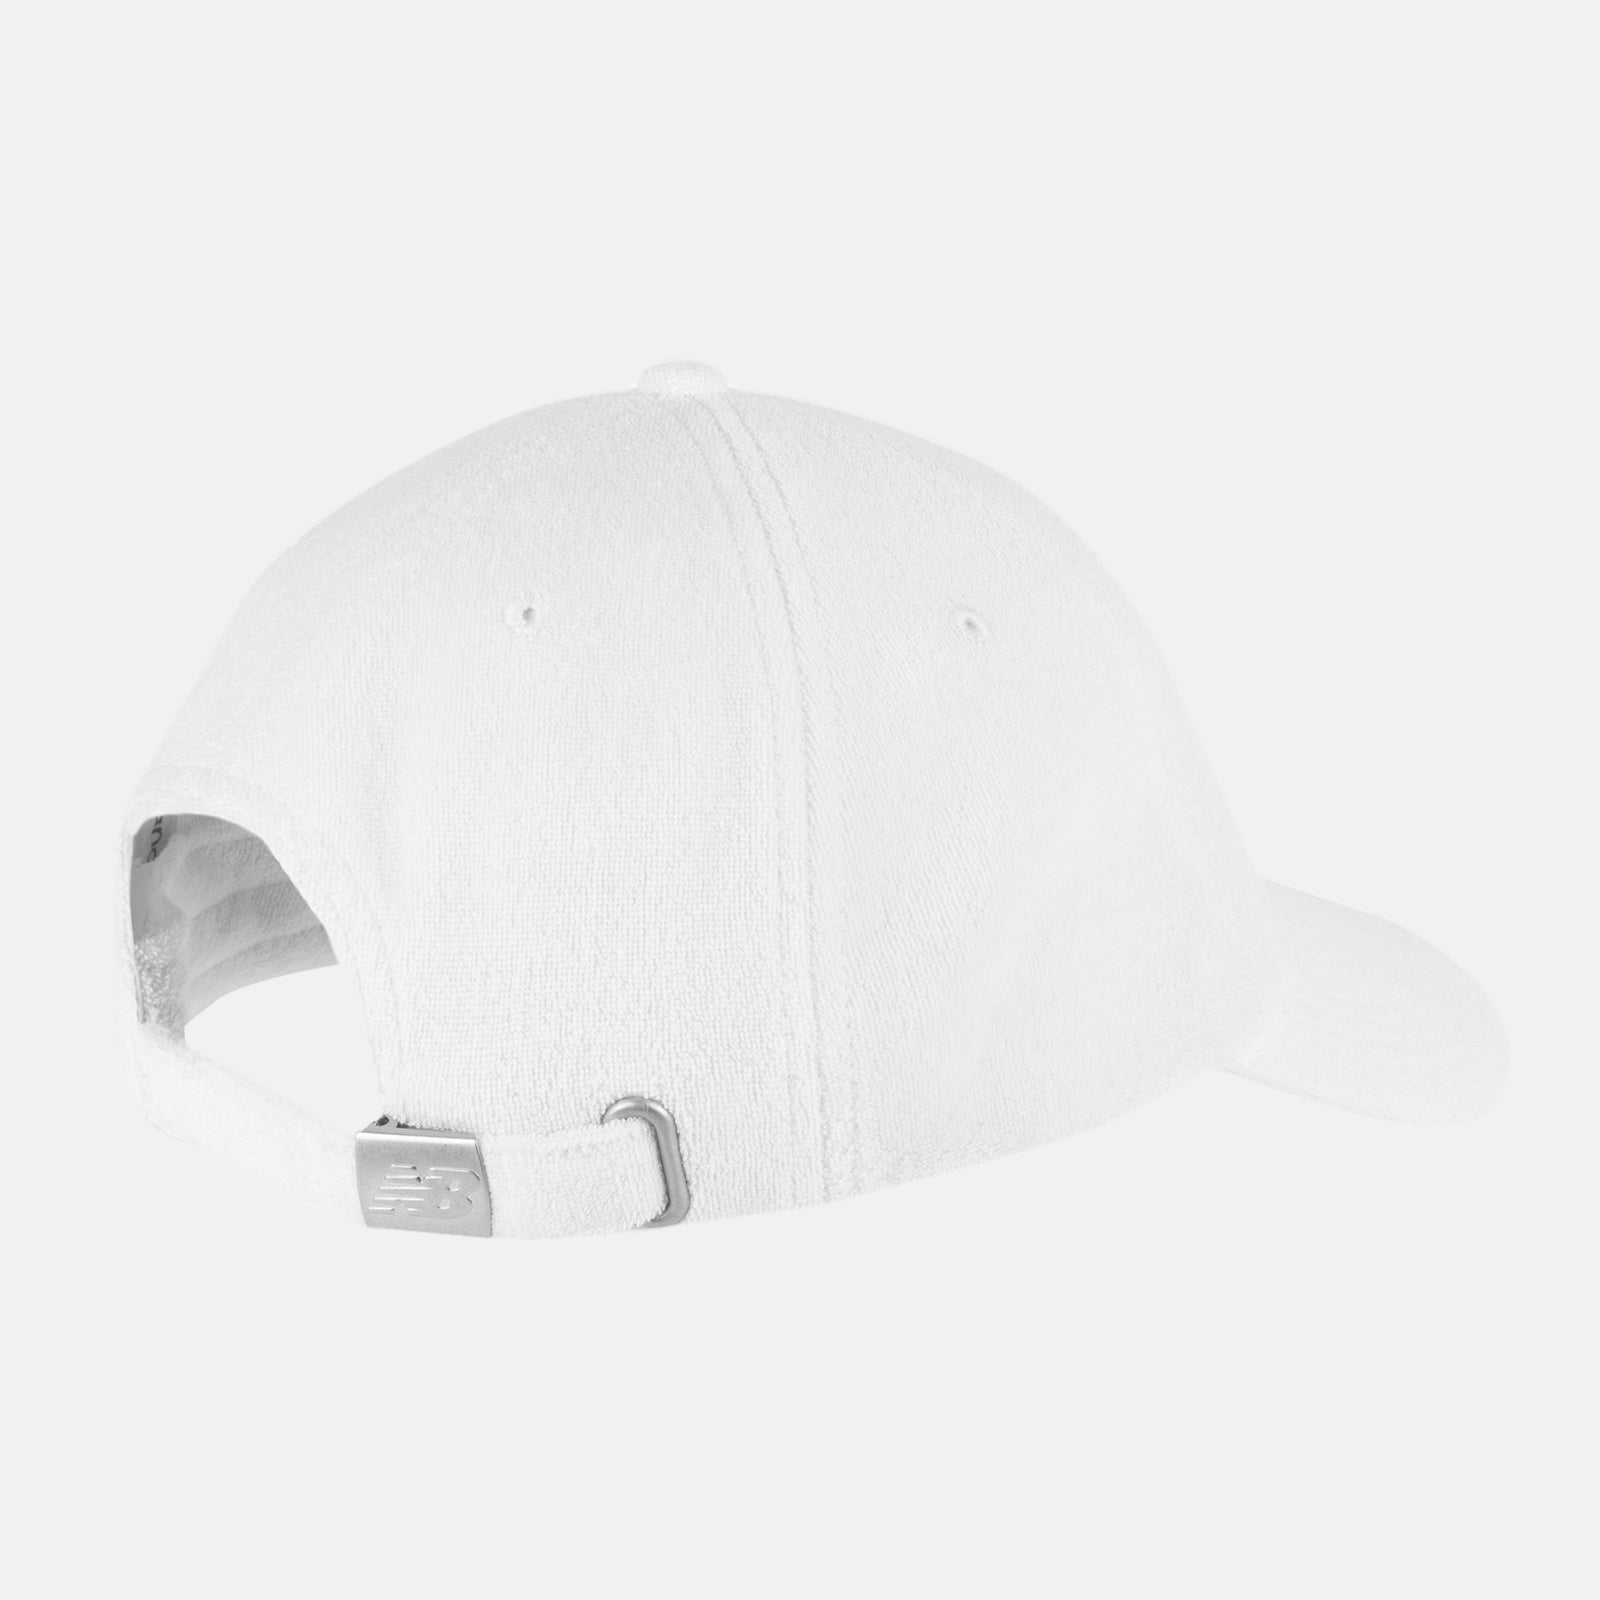 NEW BALANCE Terry 6-Panel Classic Hat in White LAH31003 O/S WHITE FROM EIGHTYWINGOLD - OFFICIAL BRAND PARTNER